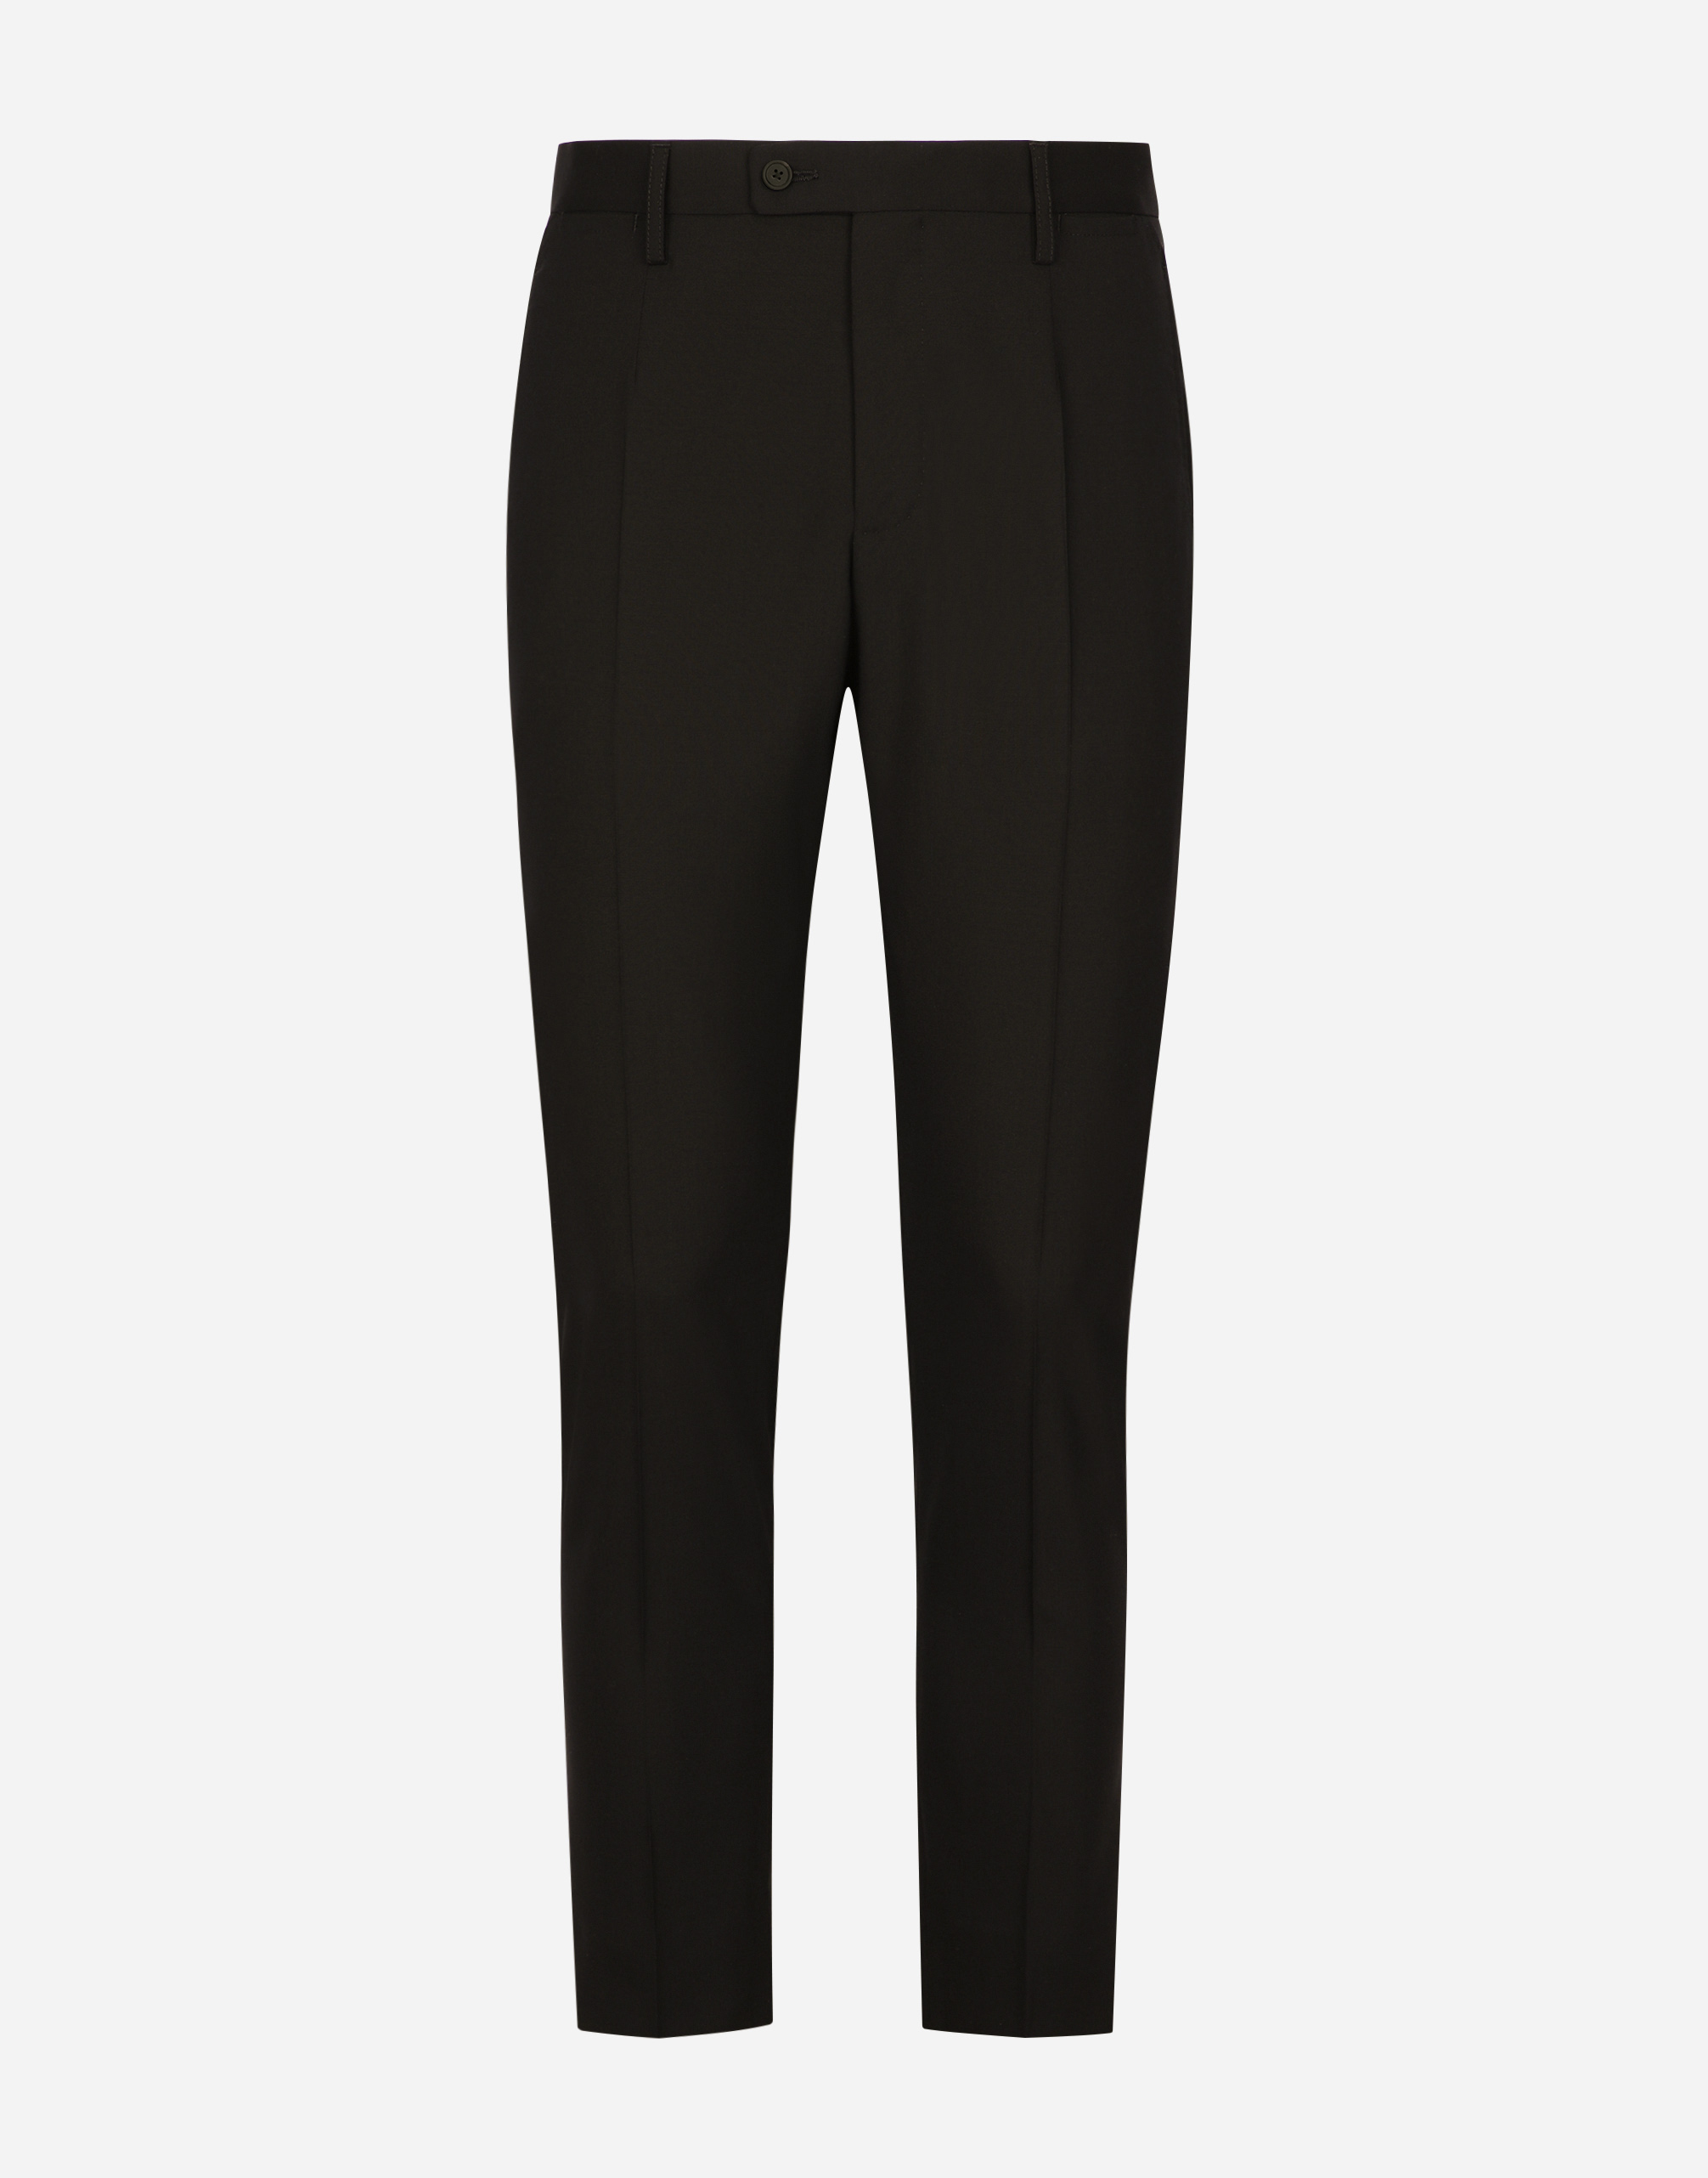 Cashmere and silk pants in Black